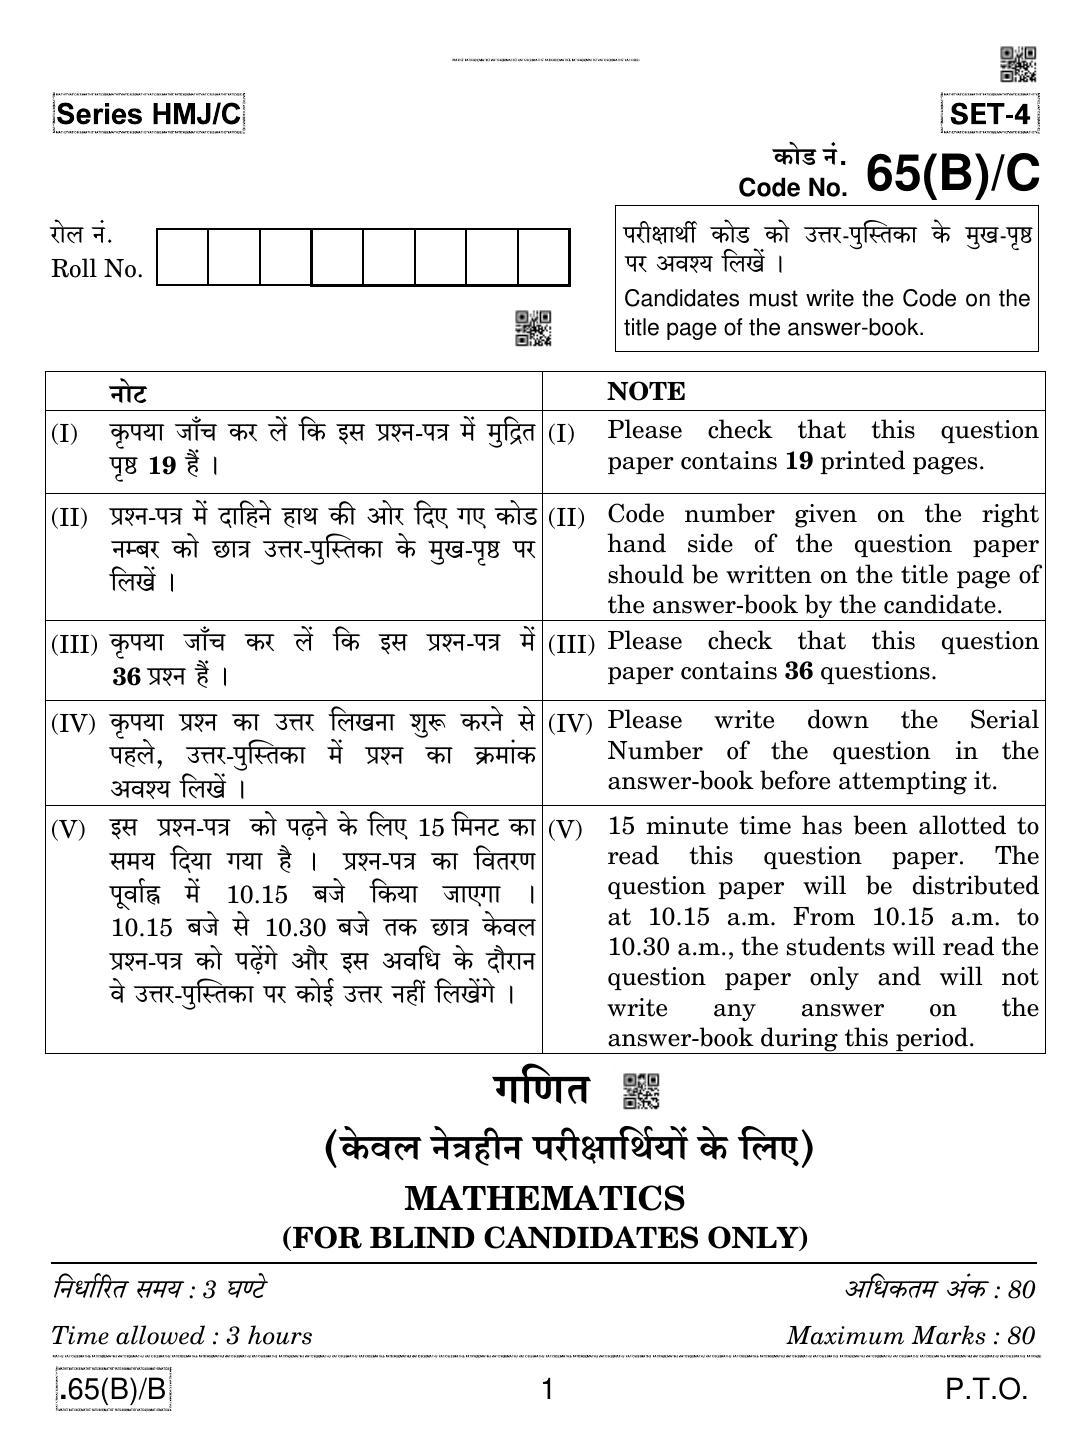 CBSE Class 12 65(B)-C - Maths For Blind Candidates 2020 Compartment Question Paper - Page 1